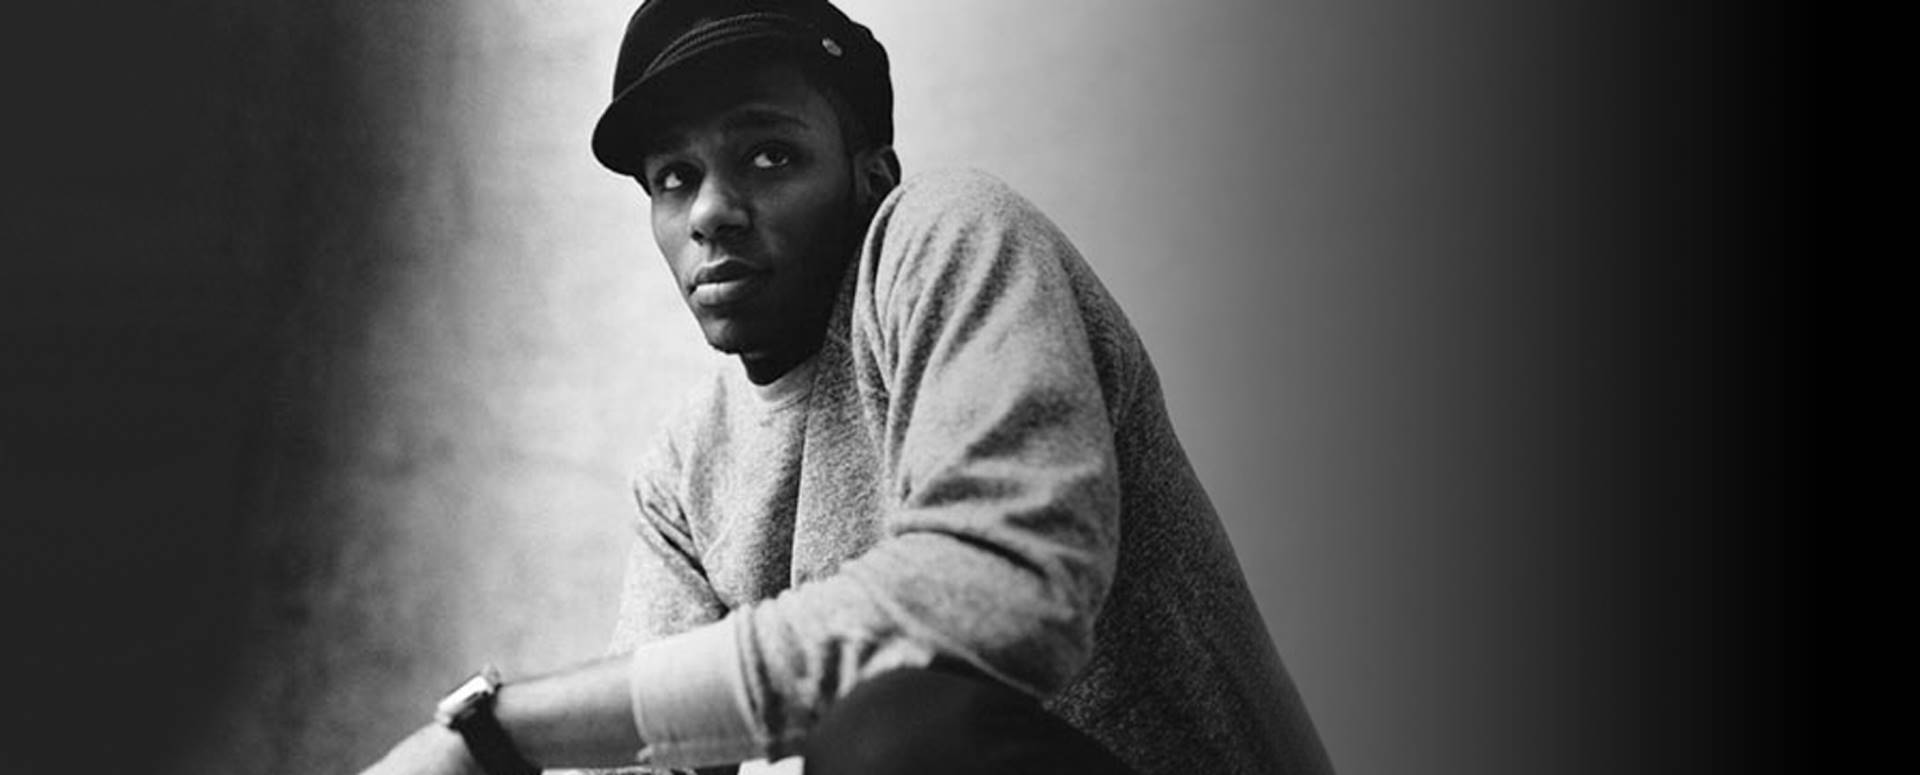 FLOOD - Yasiin Bey Remembers Mos Def with “Black on Both Sides” Celebrations